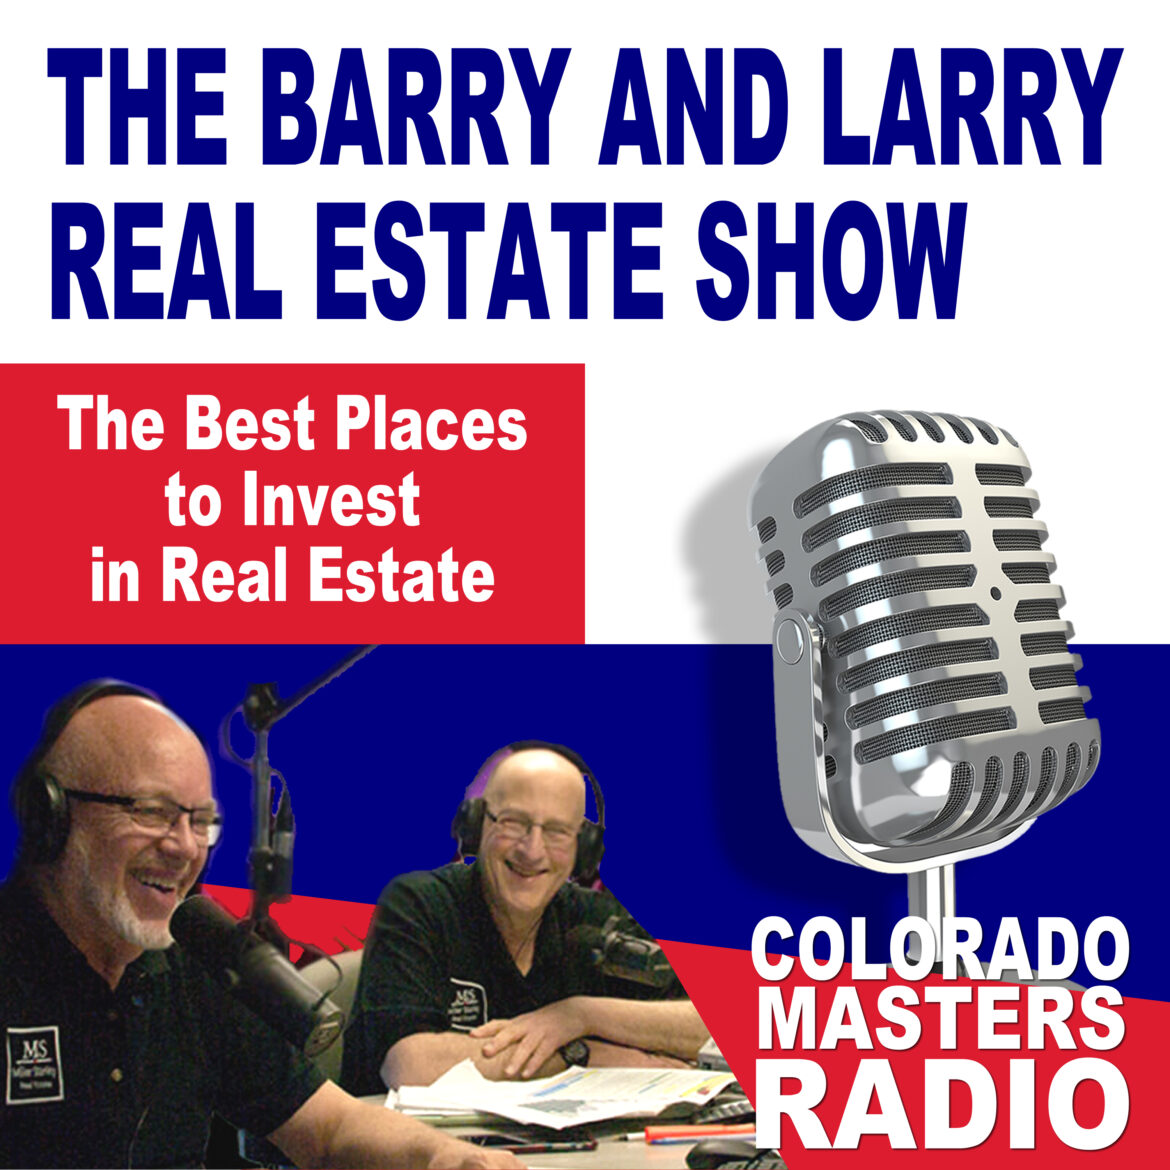 The Larry and Barry Real Estate Show - The Best Places to Invest in Real Estate